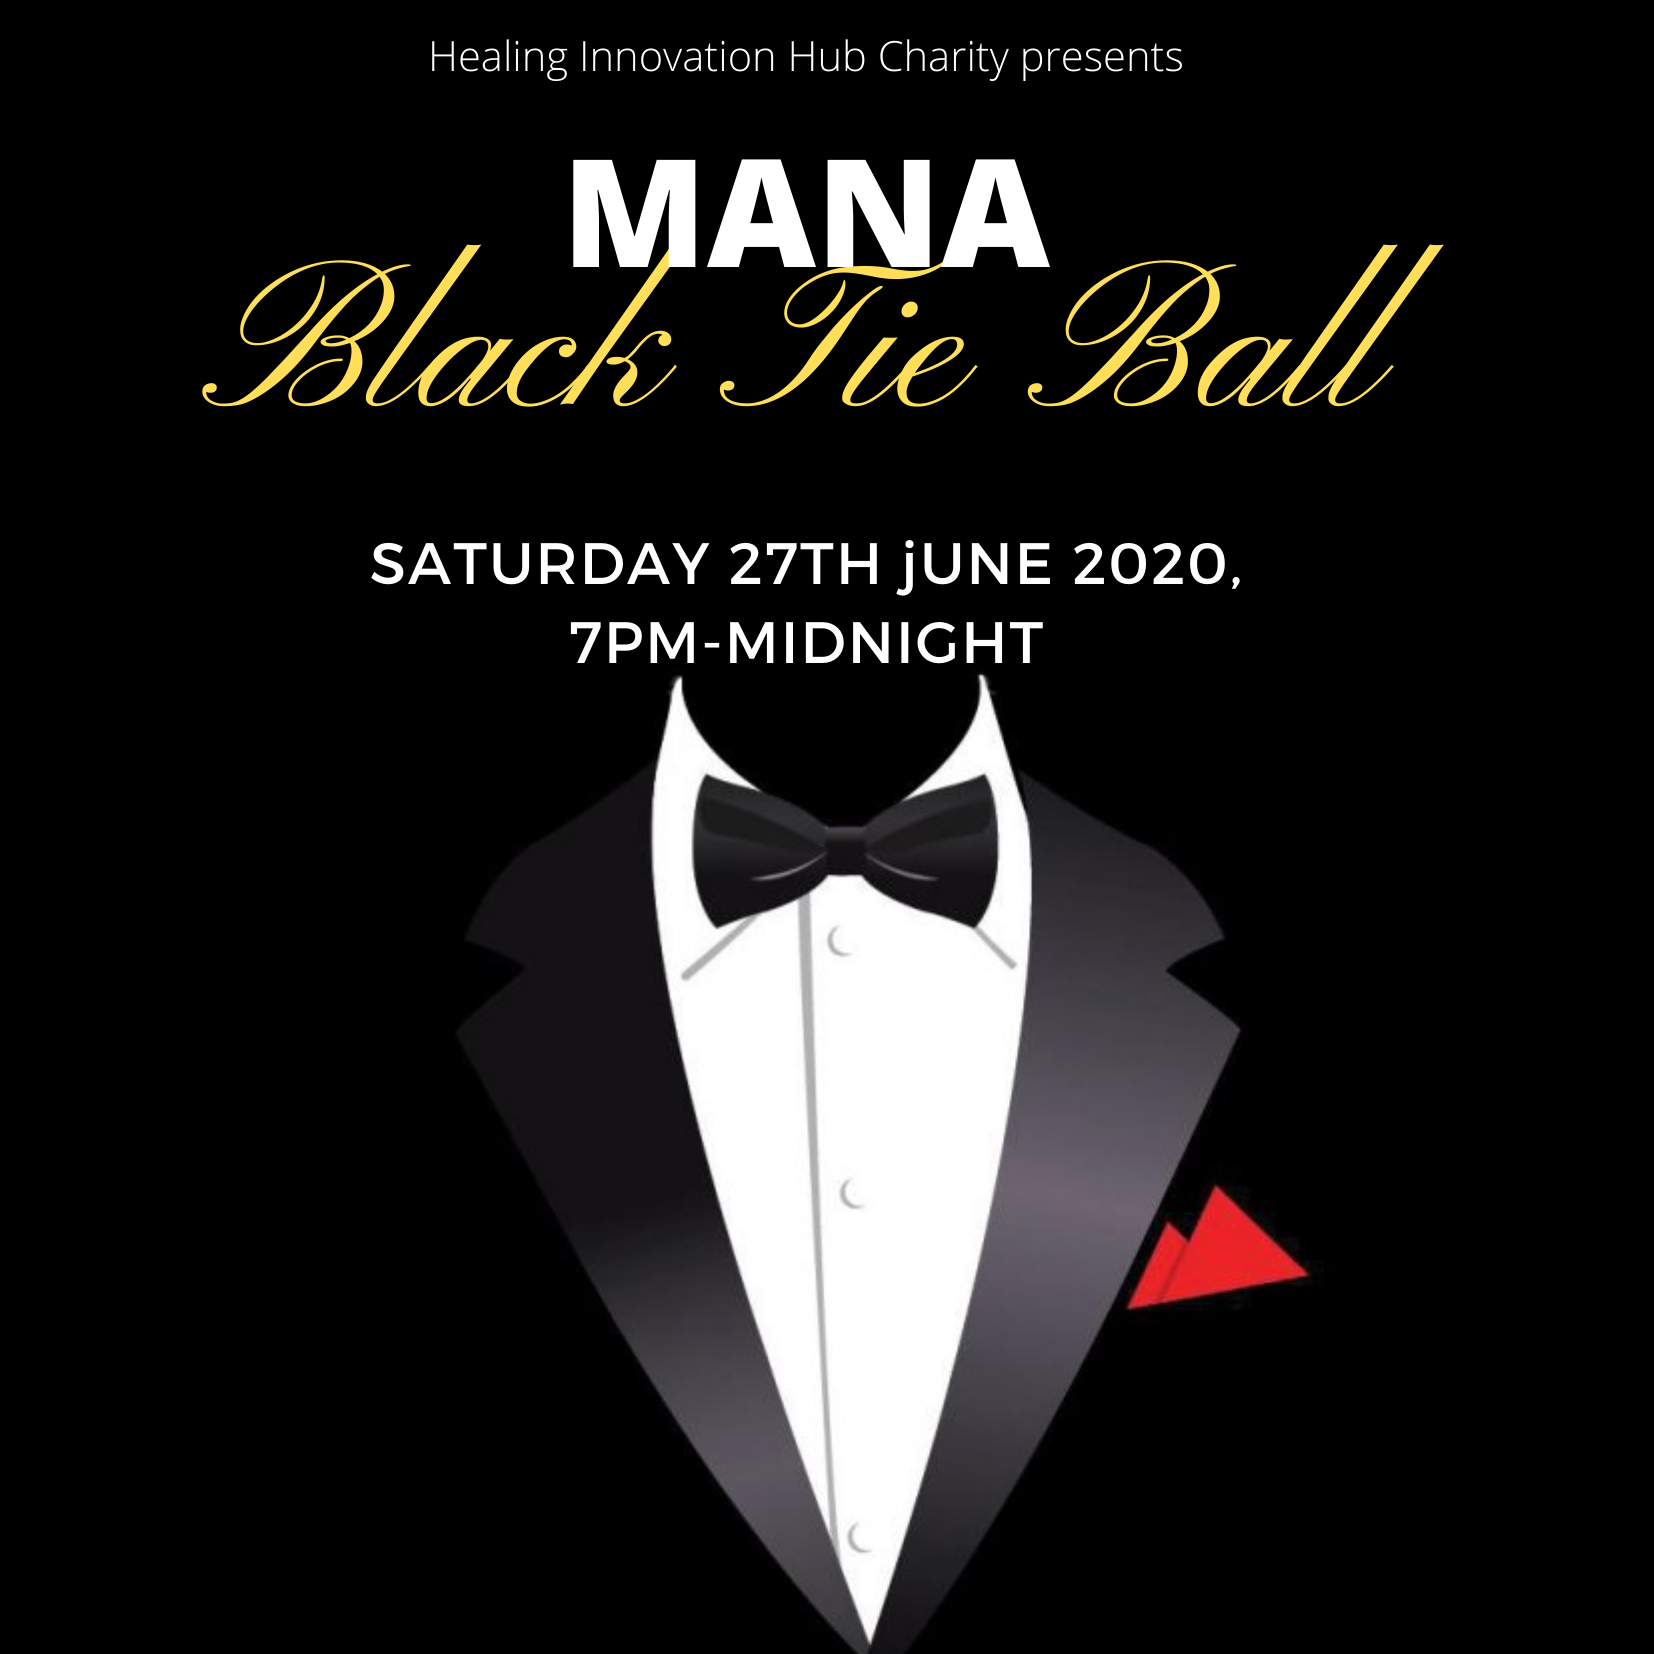 Marketing Expertise needed for Black Tie Charity Suicide Prevention Ball